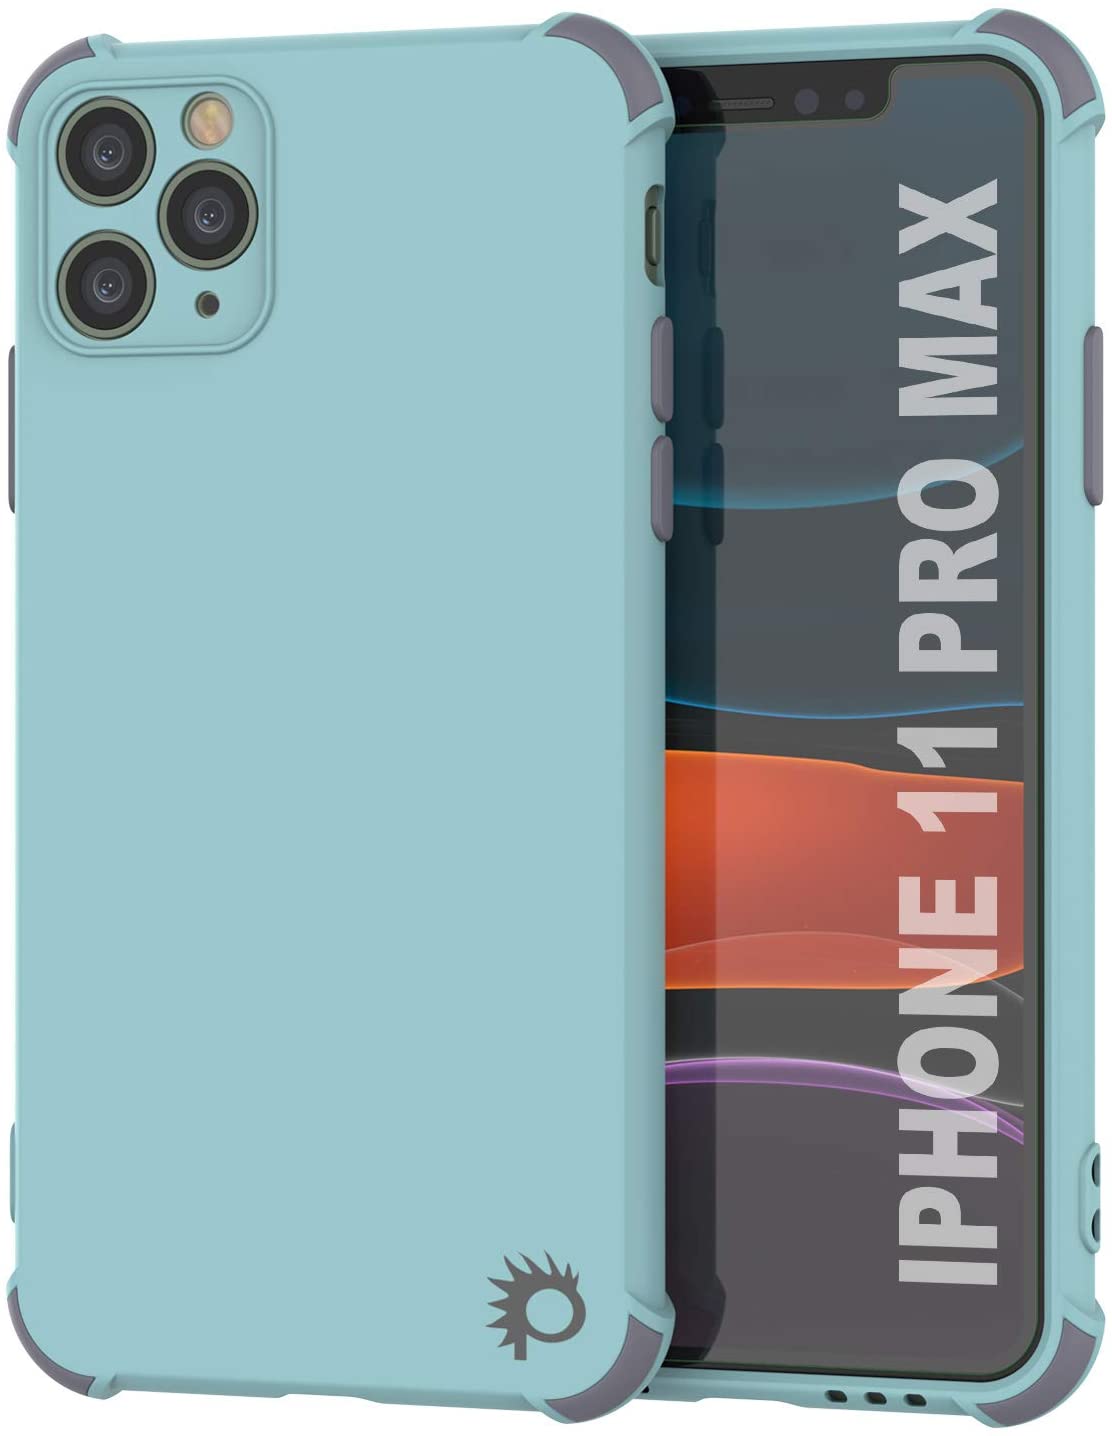 Punkcase Protective & Lightweight TPU Case [Sunshine Series] for iPhone 11 Pro Max [Teal]